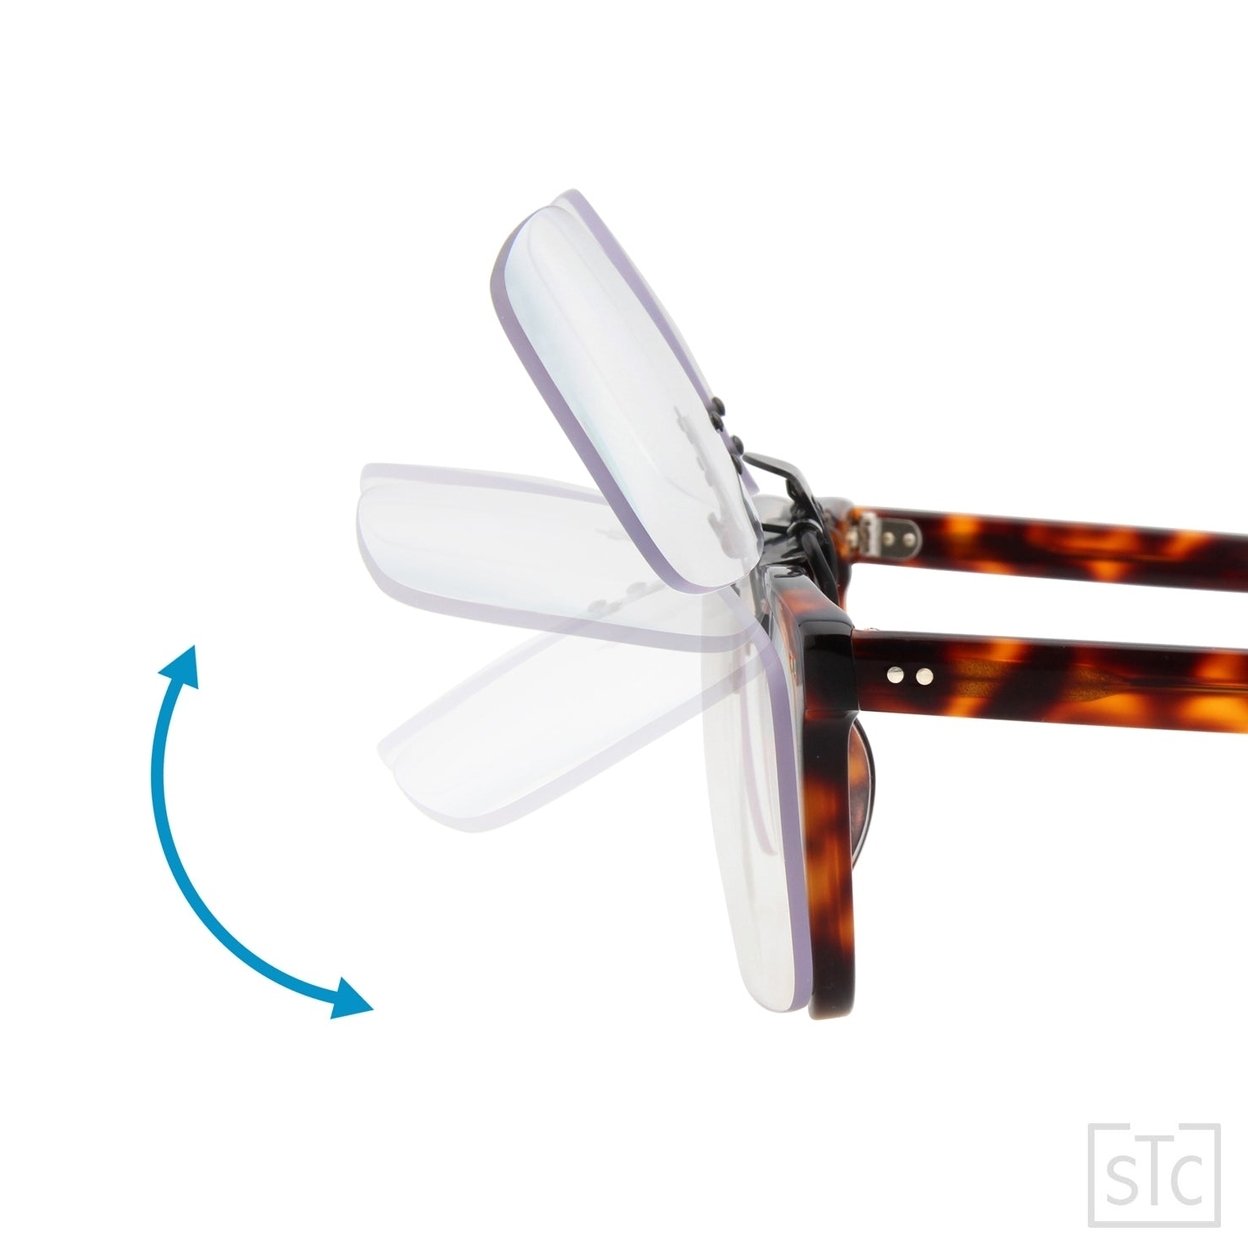 Clip-on Flip Up Rimless Magnifying, Suitable For Reading Glasses, Clip Onto Over Eyeglasses - +2.25